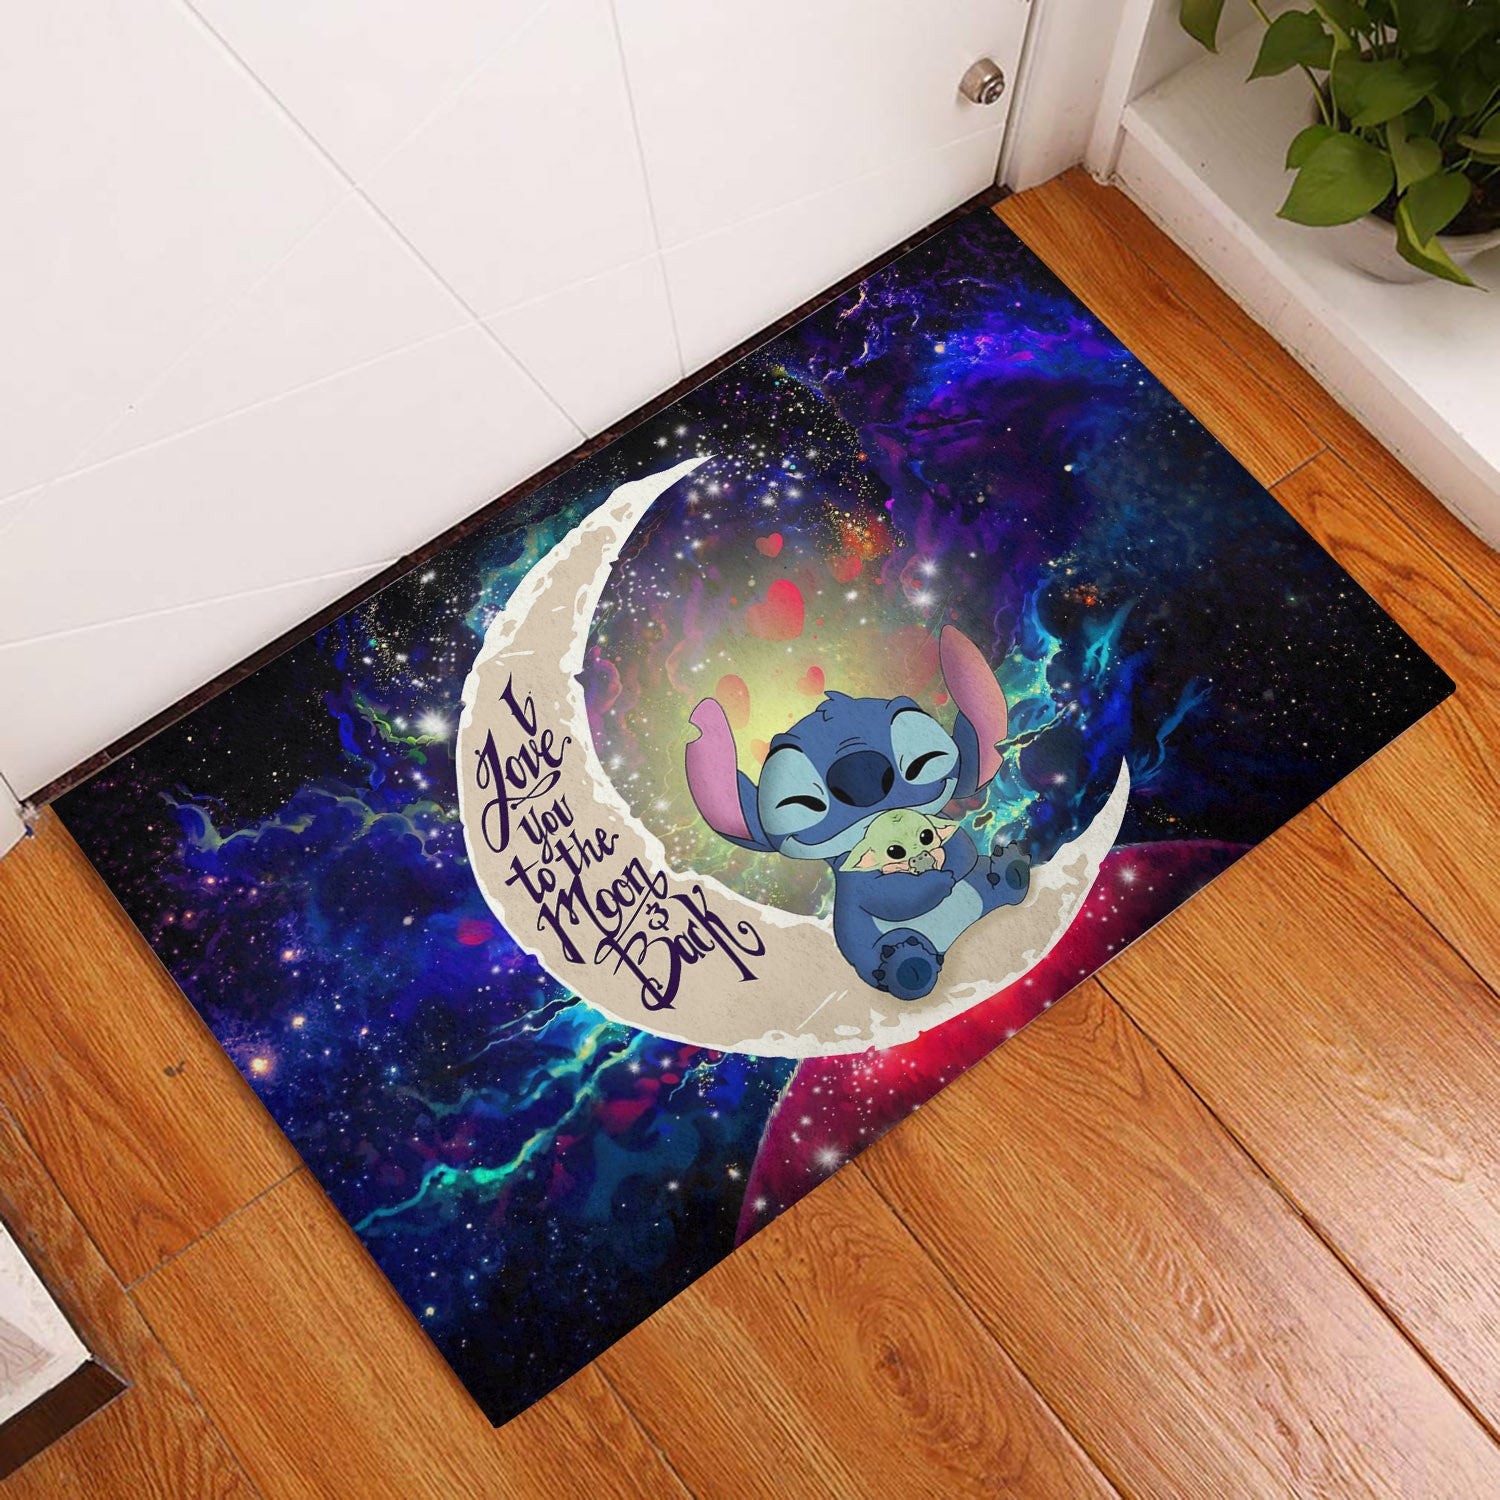 Stitch Hold Baby Yoda Love You To The Moon Galaxy Back Door Mats Home Decor